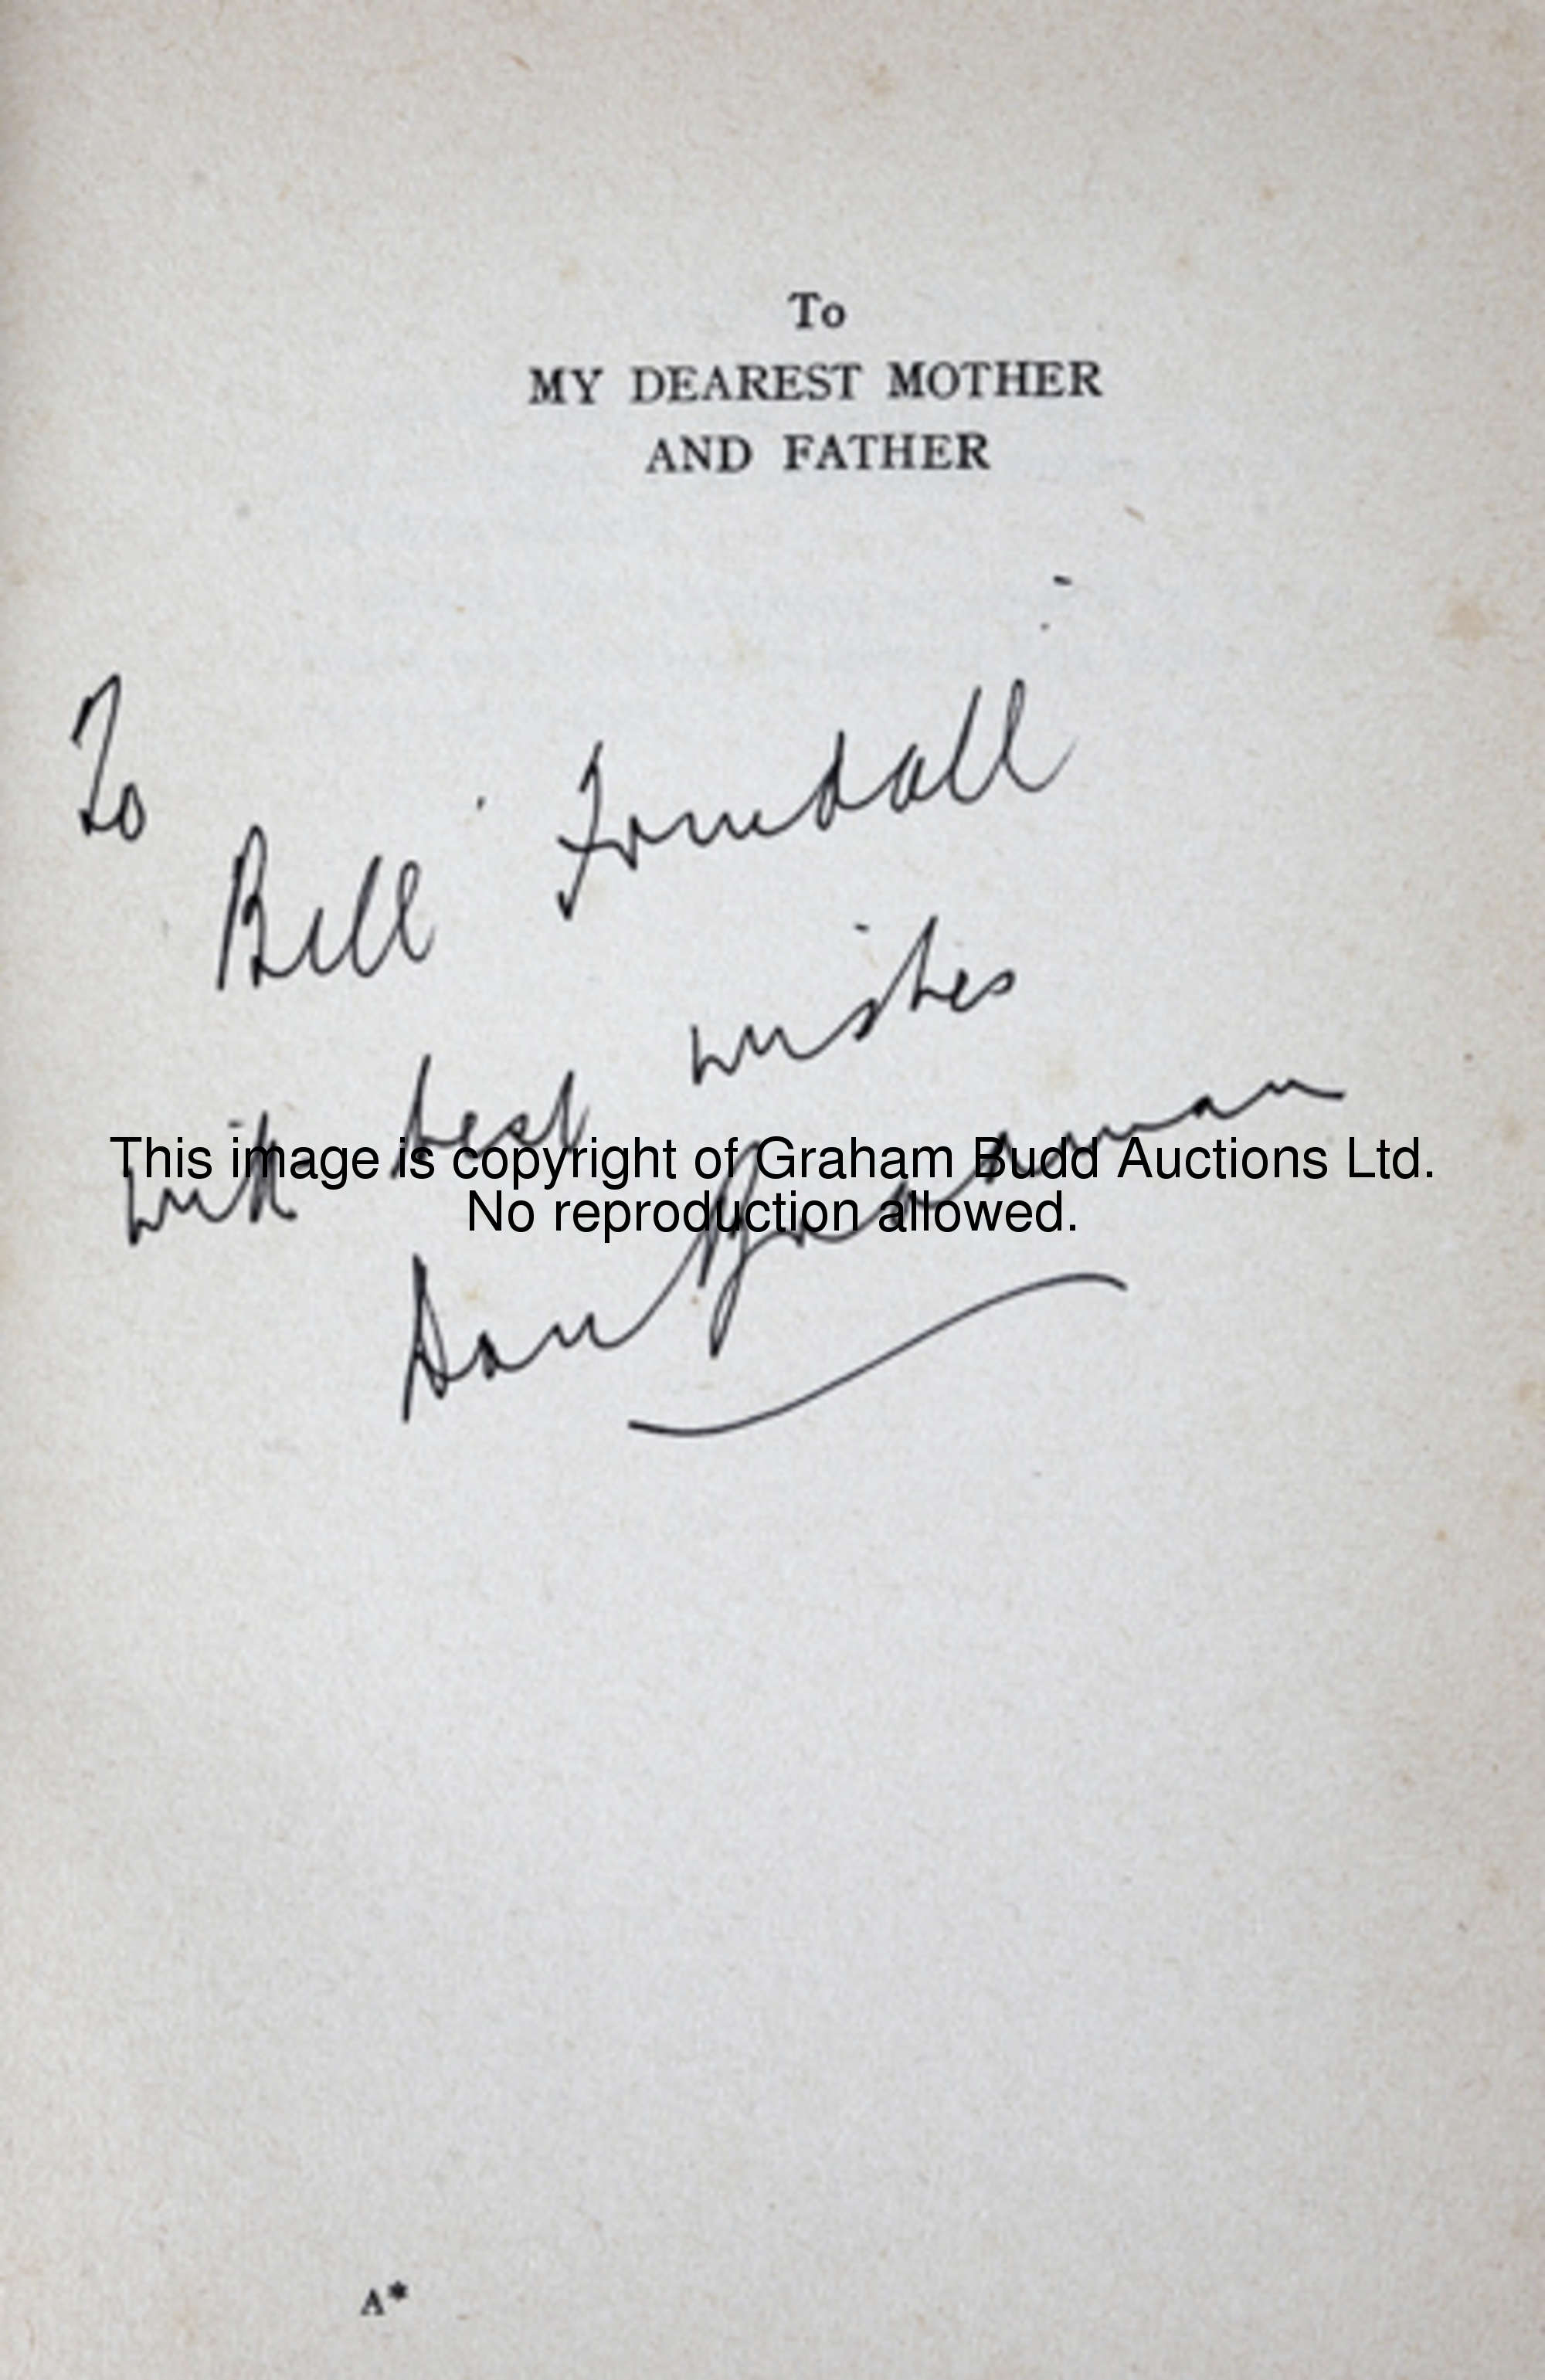 Four books signed by Sir Don Bradman and personally dedicated to Bill Frindall, i) The Story of My L...